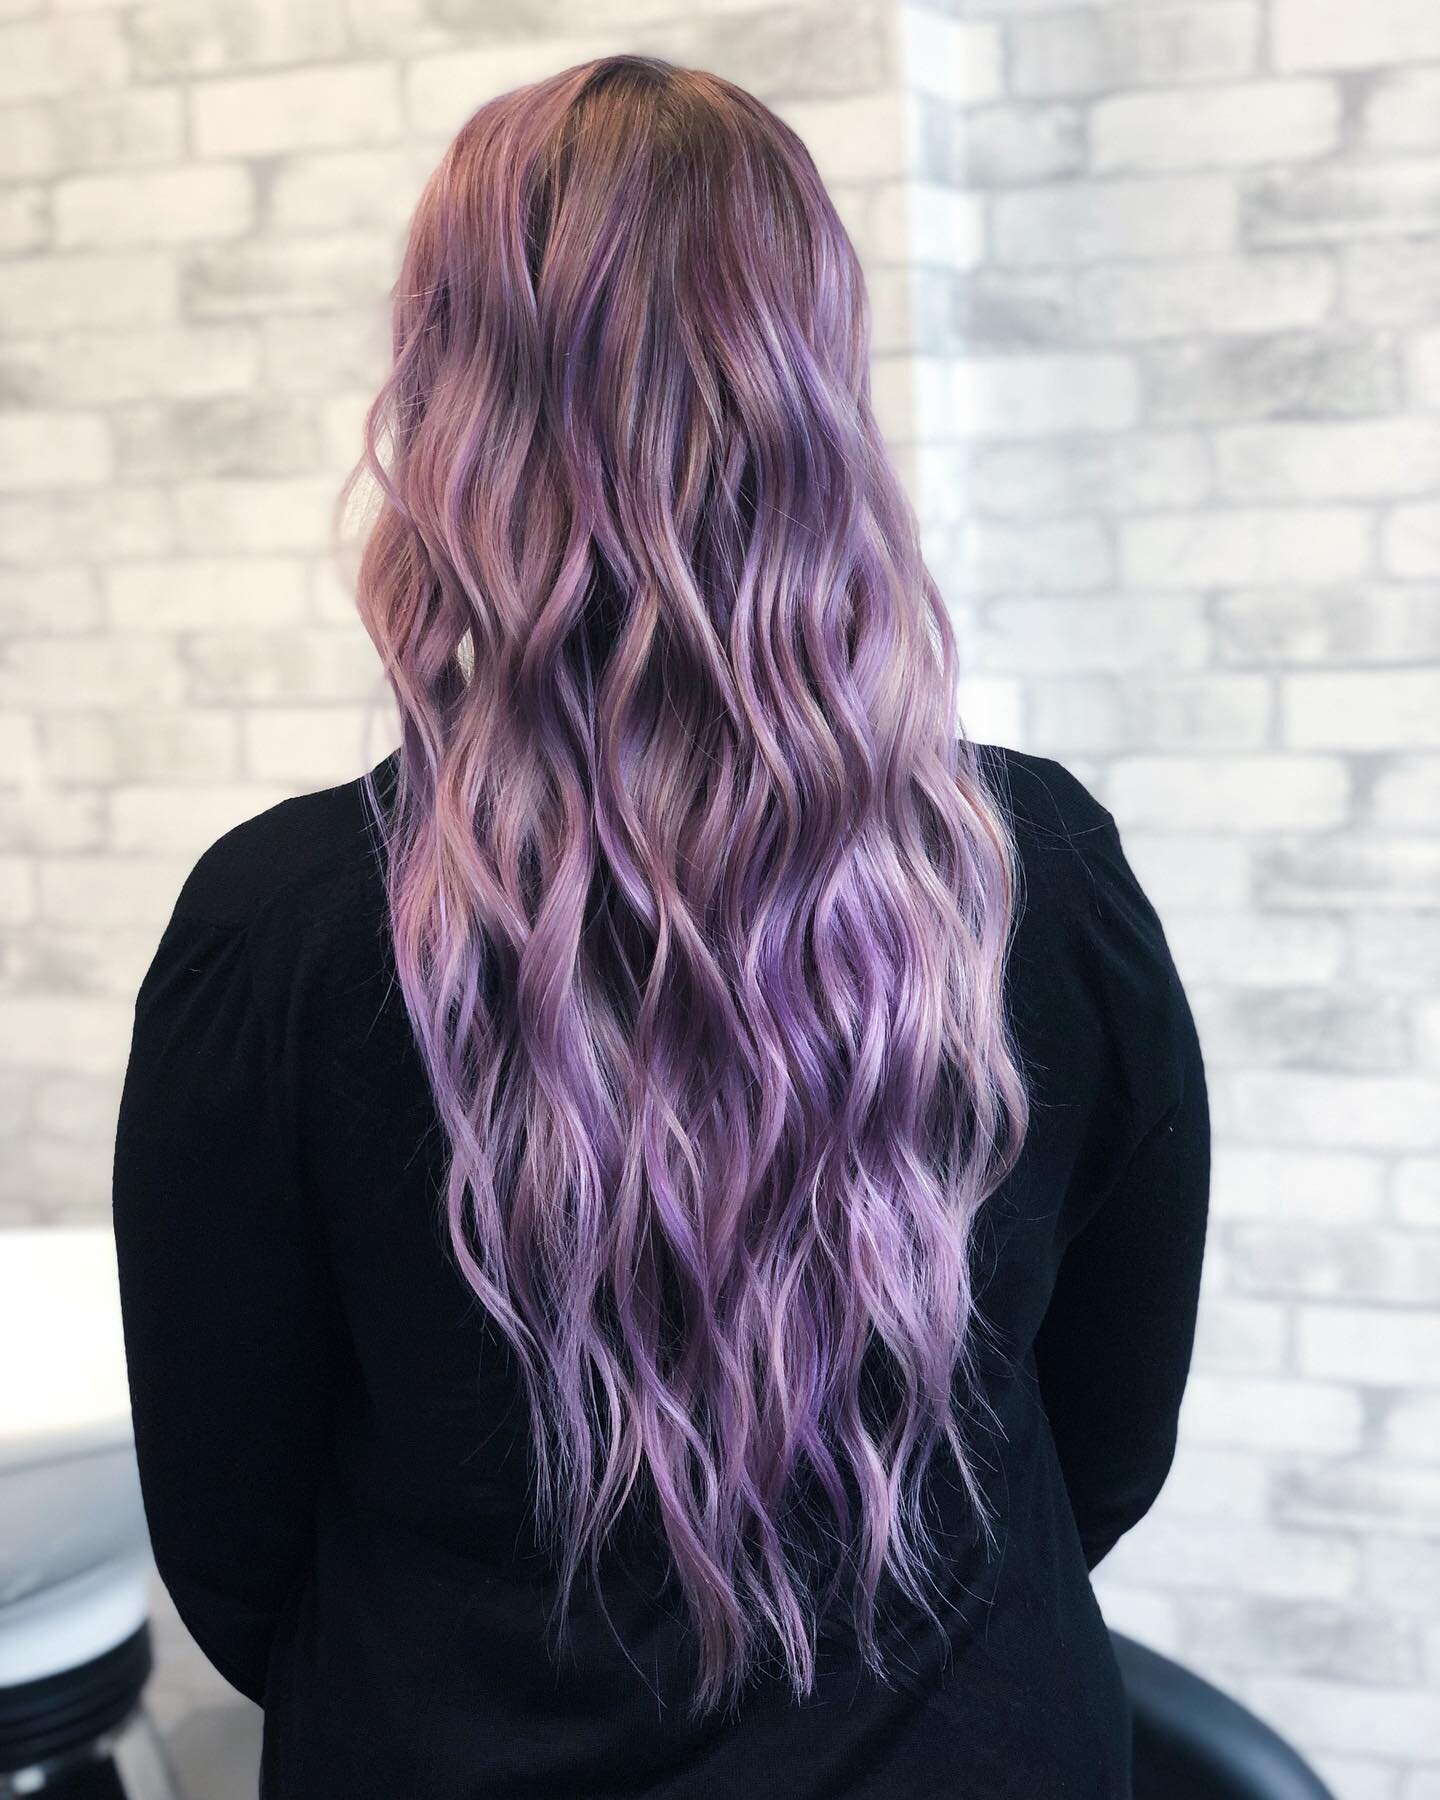 You don&rsquo;t normally see this kind of color on my page, however, it&rsquo;s so nice to switch things up every now and again. 
This specific client is naturally medium blonde and comes in for a balayage to blend her in coming grey. Occasionally sh